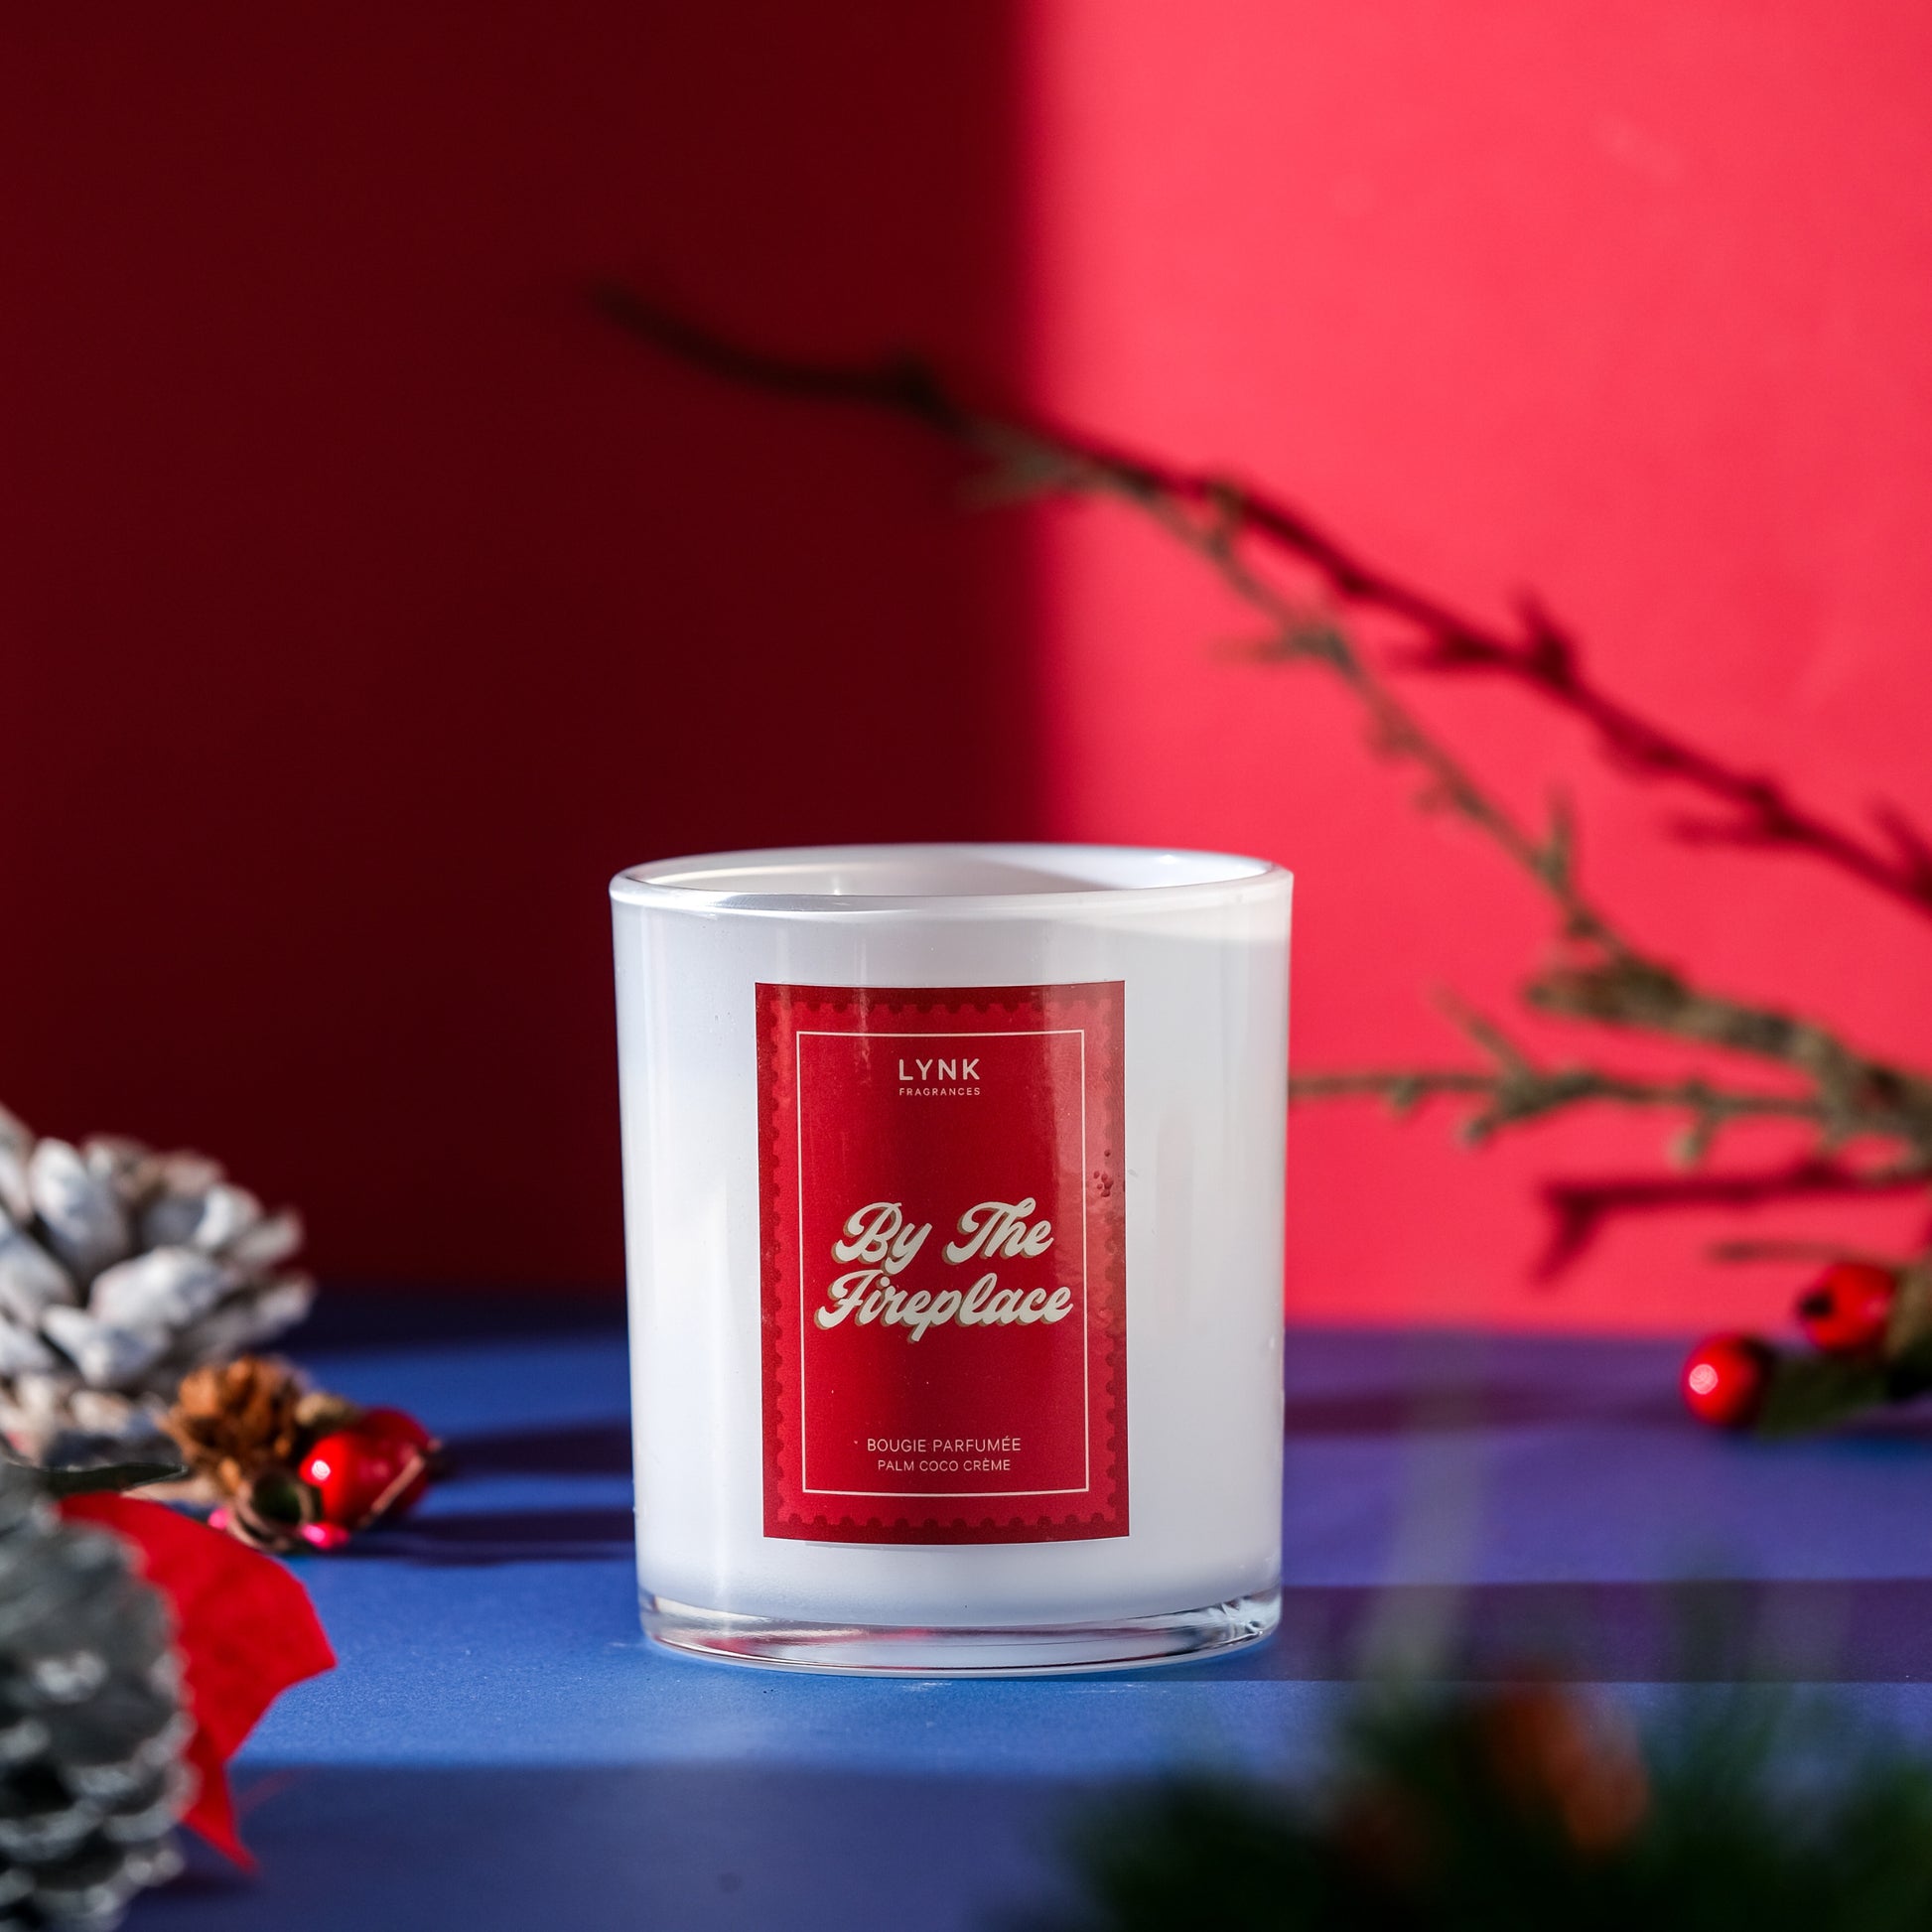 The Fireplace Scented Candle